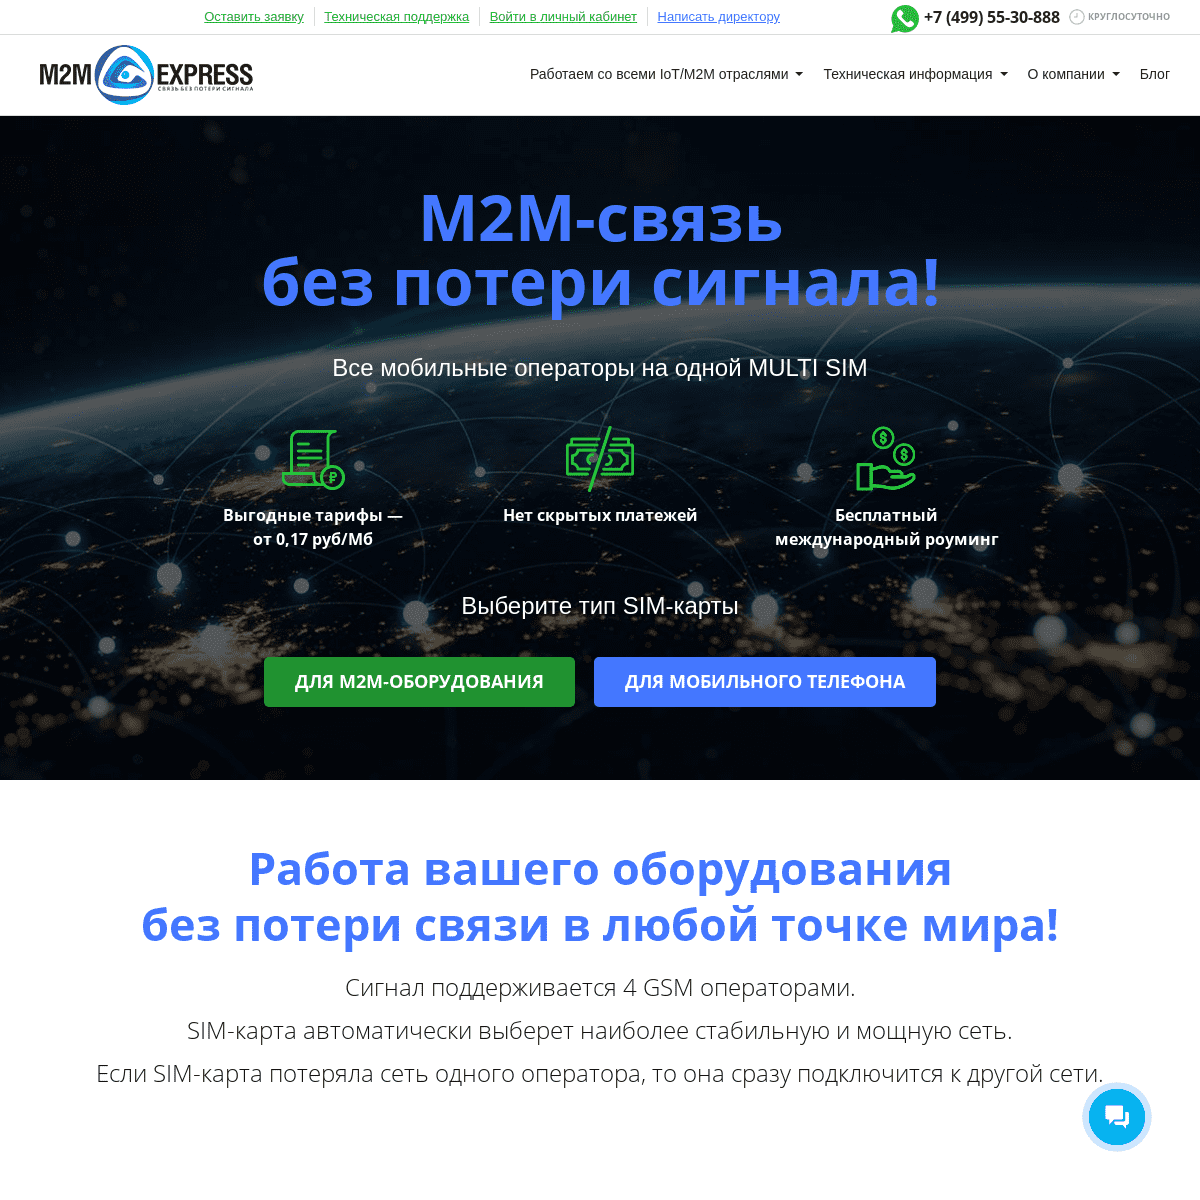 A complete backup of https://m2mexpress.ru